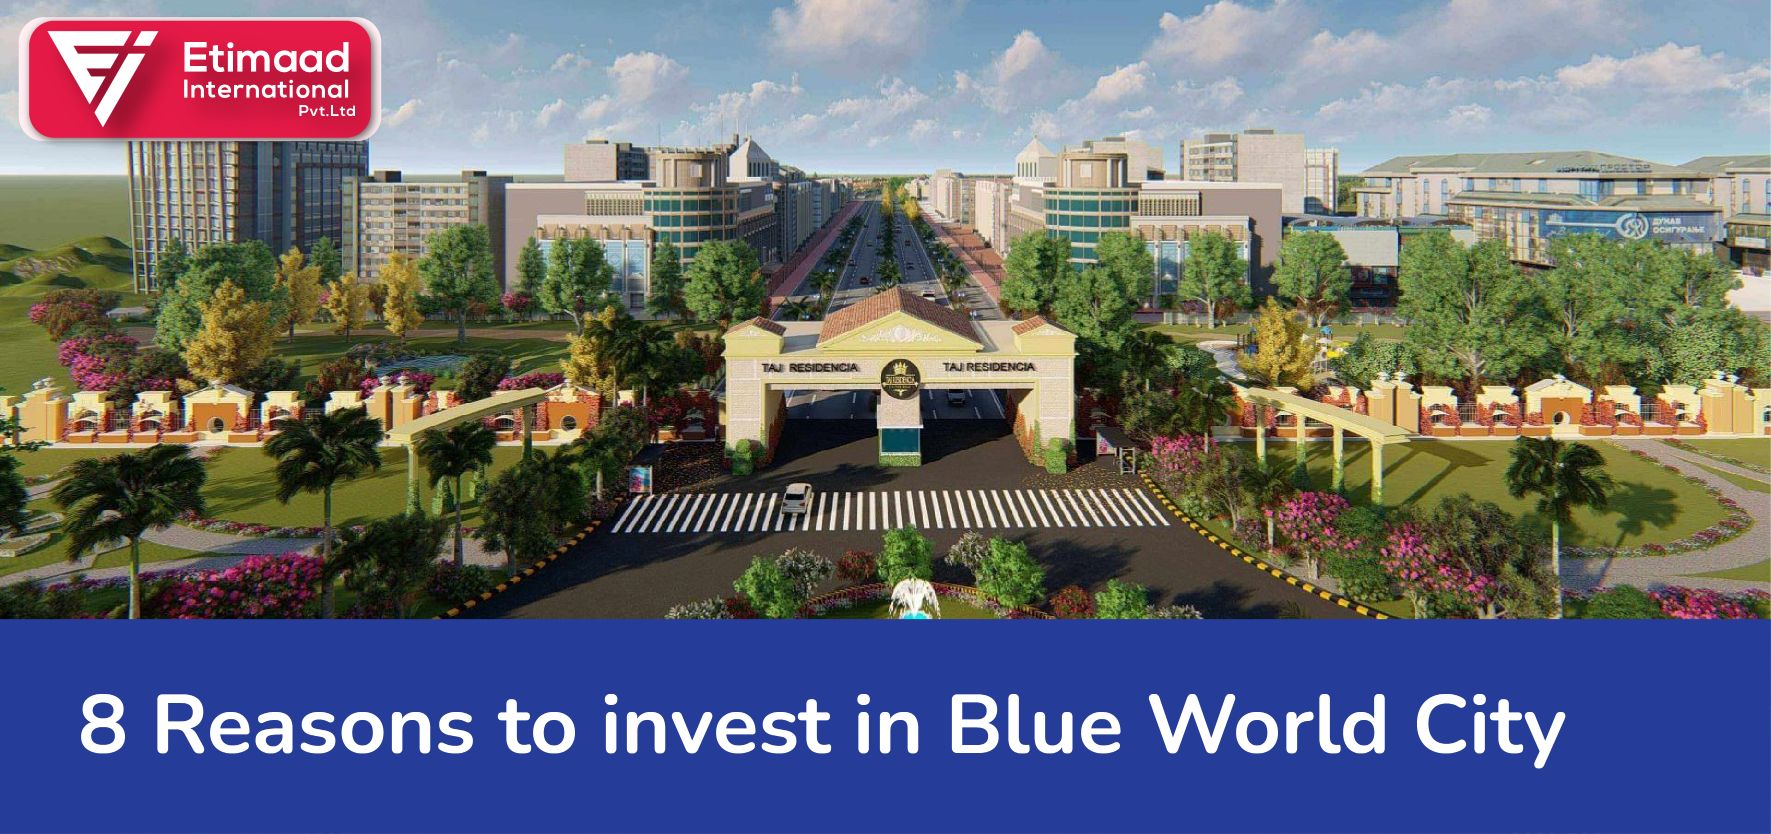 8 Reasons to invest in Blue World City-01